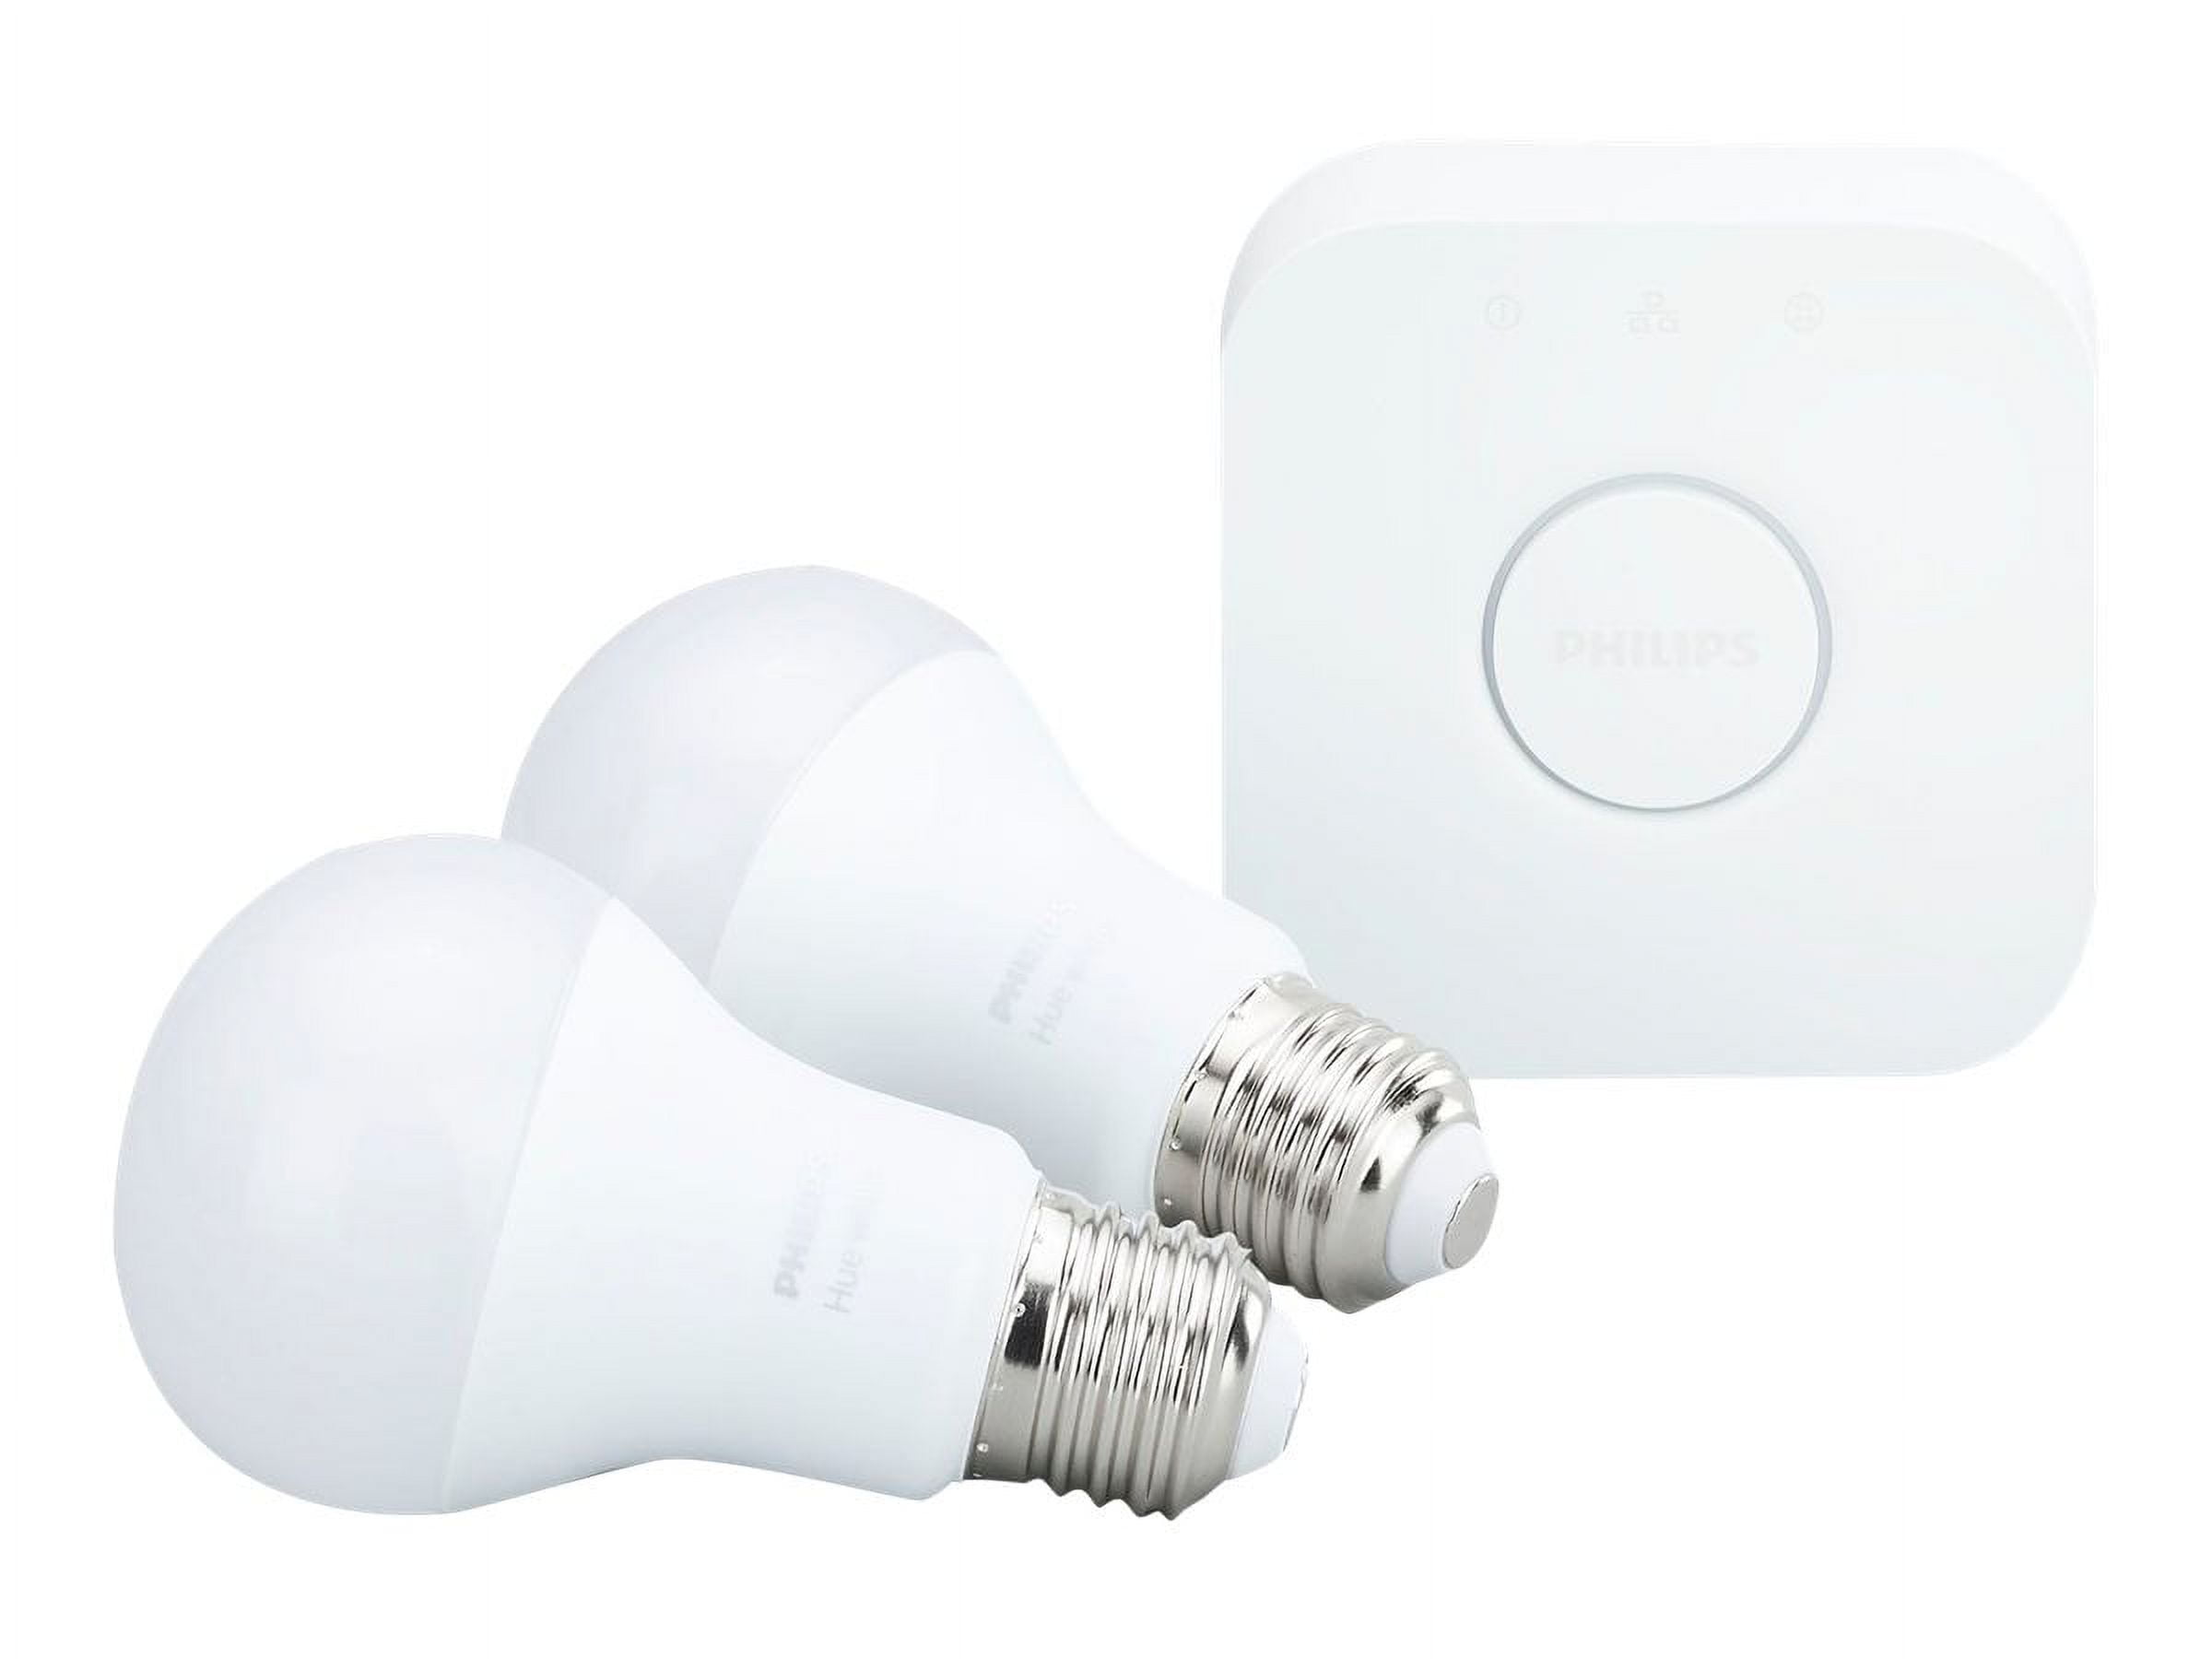 Philips Hue LED 60-Watt White Ambiance A19 Dimmable Wi-Fi Connected Smart  Bulb 2 pack Starter Kit With Hub, E26 Medium Base 